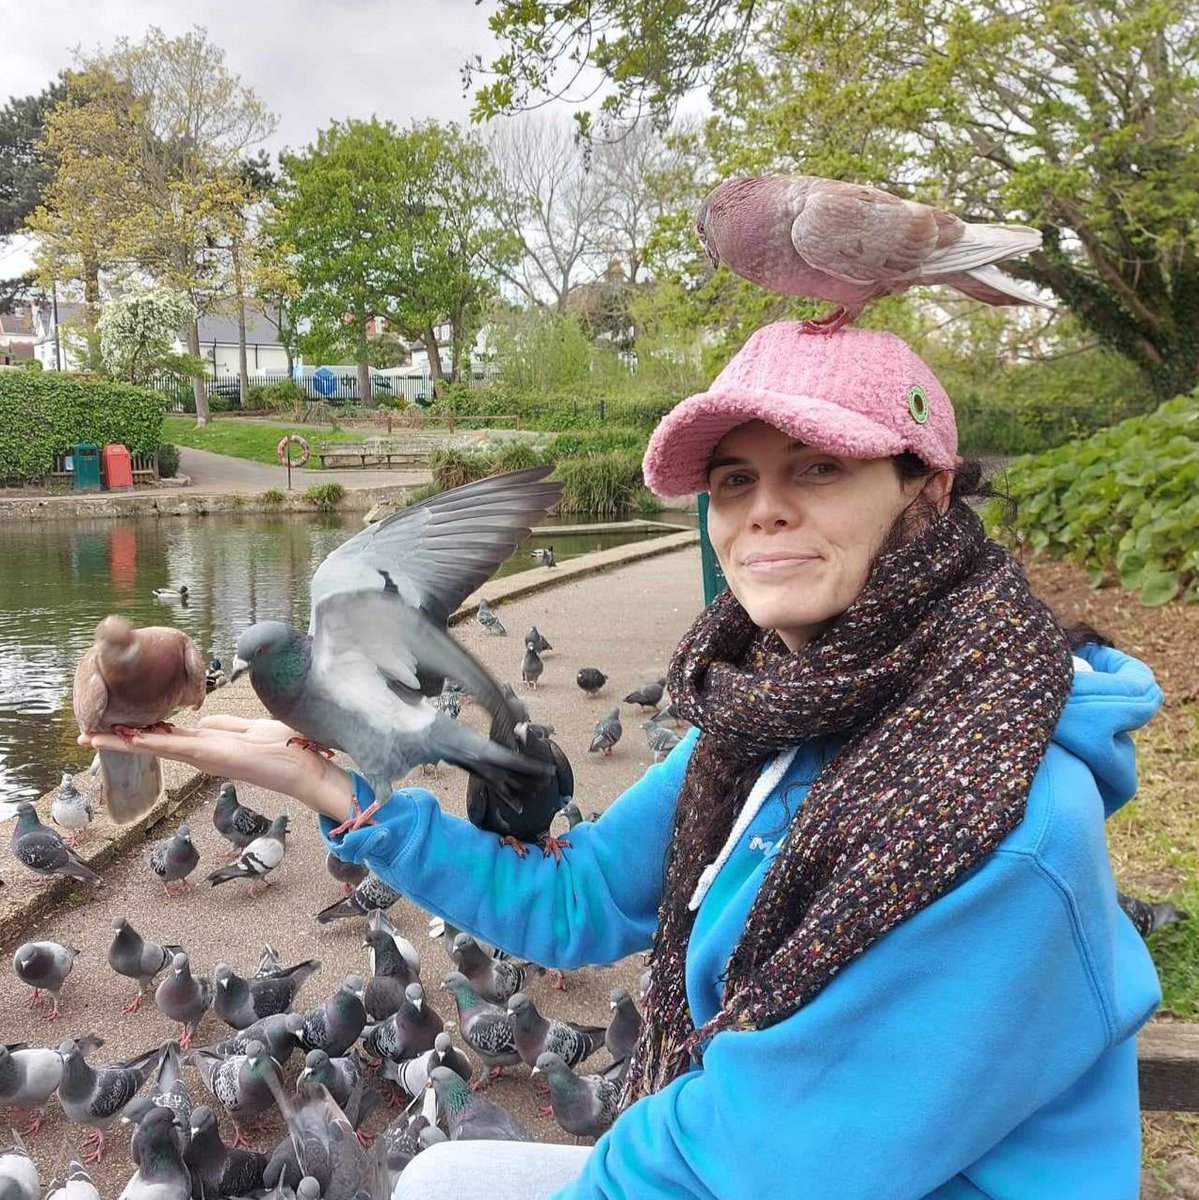 The pigeon on my head is called Cappuccino. She is the only one who stayed after all the bread was gone. Be like Cappuccino. 💗